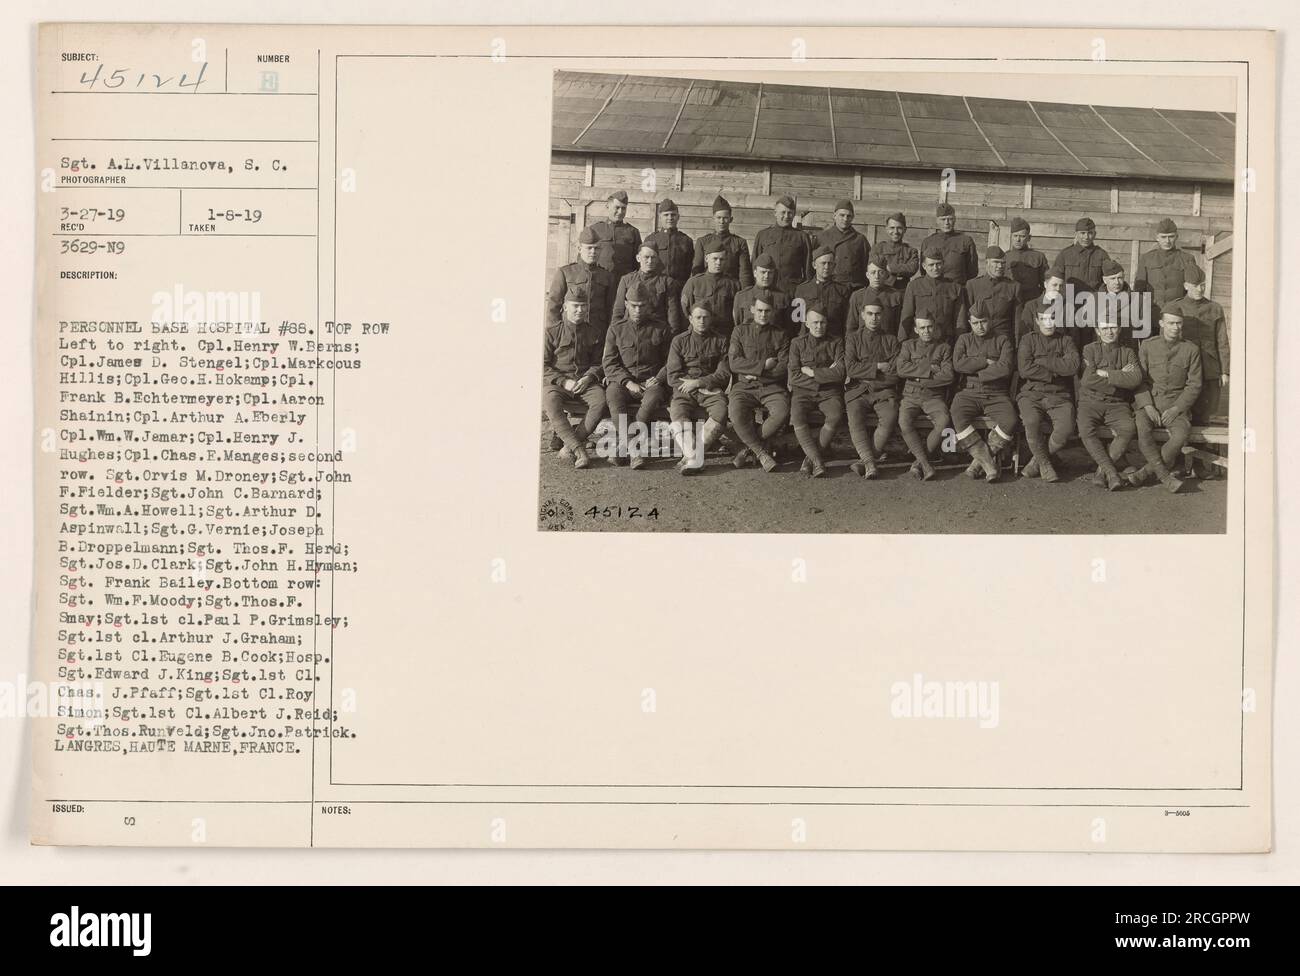 Personnel from Base Hospital #88 posing for a photograph. The individuals in the top row, from left to right, are Cpl. Henry W. Berns, Cpl. James D. Stengel, Cpl. Markcous Hillis, Cpl. Geo. H. Hokemp, Cpl. Frank B. Echtermeyer, Cpl. Aaron Shainin, Cpl. Arthur A. Eberly, Cpl. Wm. W. Jemar, Cpl. Henry J. Hughes, and Cpl. Chas. F. Manges. The second row consists of Sgt. Orvis M. Droney, Sgt. John F. Fielder, Sgt. John C. Barnard, Sgt. W.A. Howell, Sgt. Arthur D. Aspinwall, Sgt. O. Vernie, Joseph B. Droppelmann, Sgt. Thos. F. Herd, Sgt. Jos. D. Clark, Sgt. John H. Han, and Sgt. Frank Bailey. The b Stock Photo